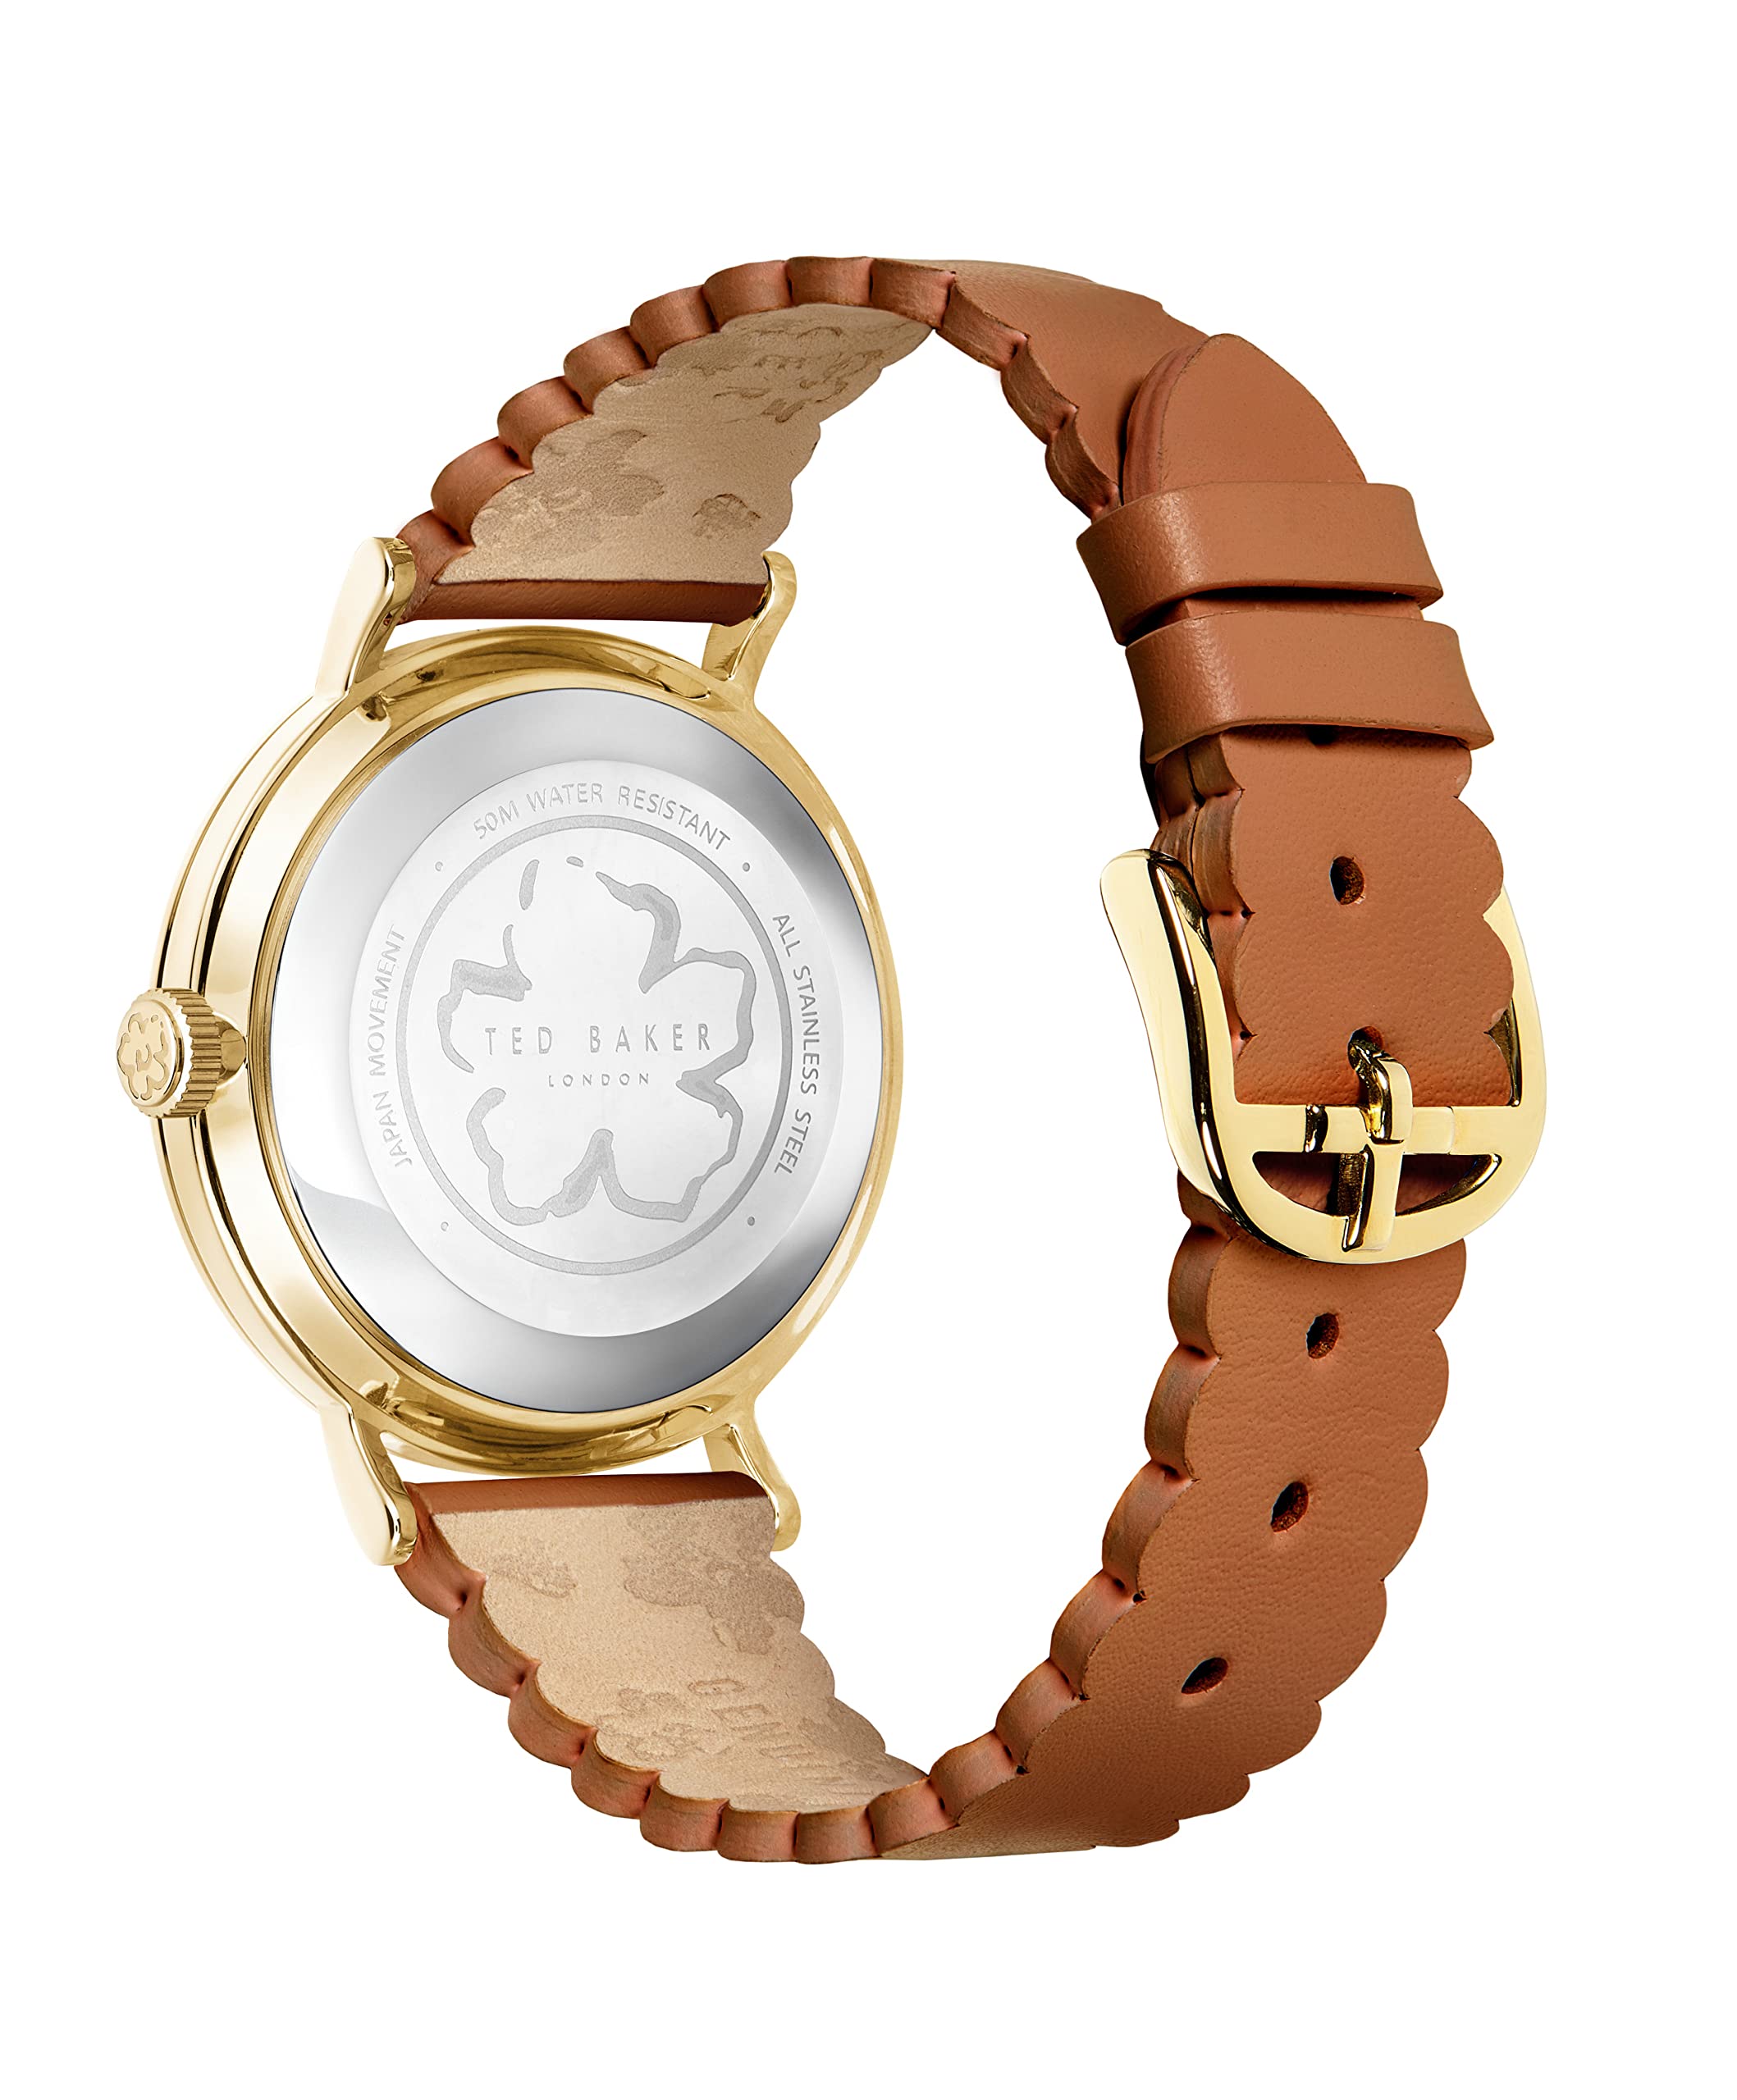 Ted Baker Phylipa Bloom Tan Leather Strap Watch (Model: BKPPHF2099I)